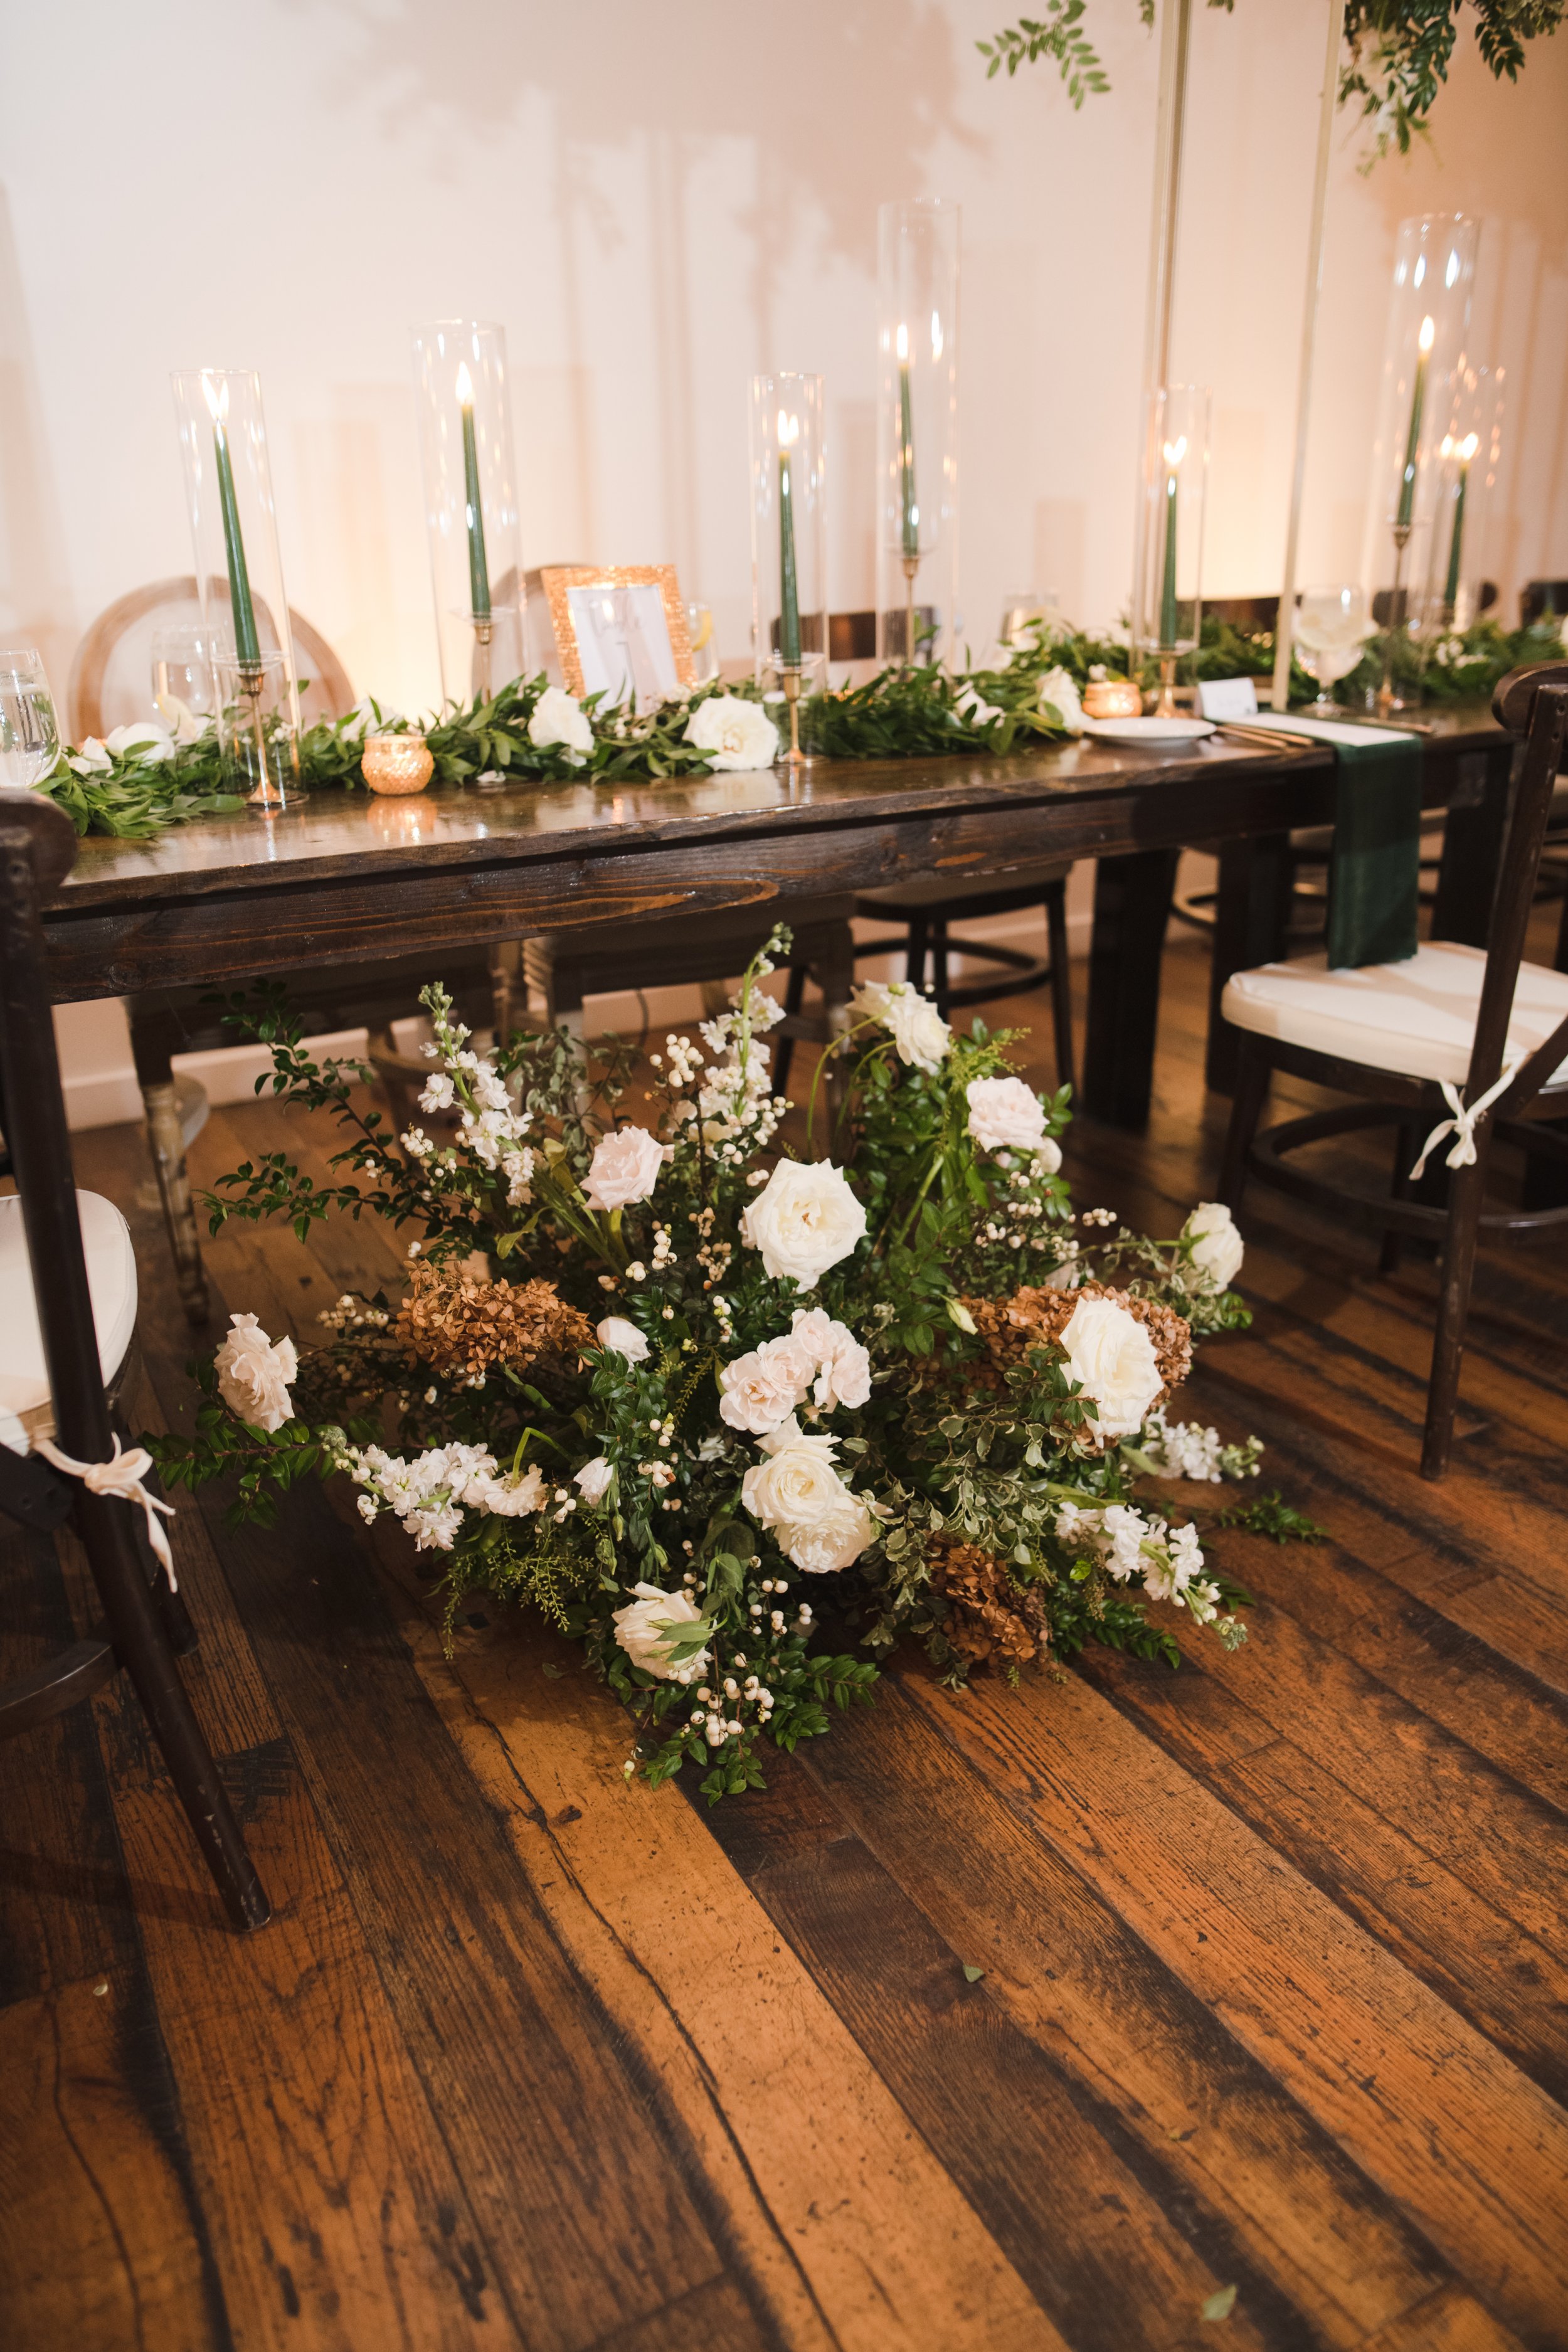 Elegant tablescapes for garden-inspired white and green wedding. Dark green tapers and natural garland. Accented with gold votives and petal heavy white roses. Designed by Rosemary and Finch in Nashville, TN.